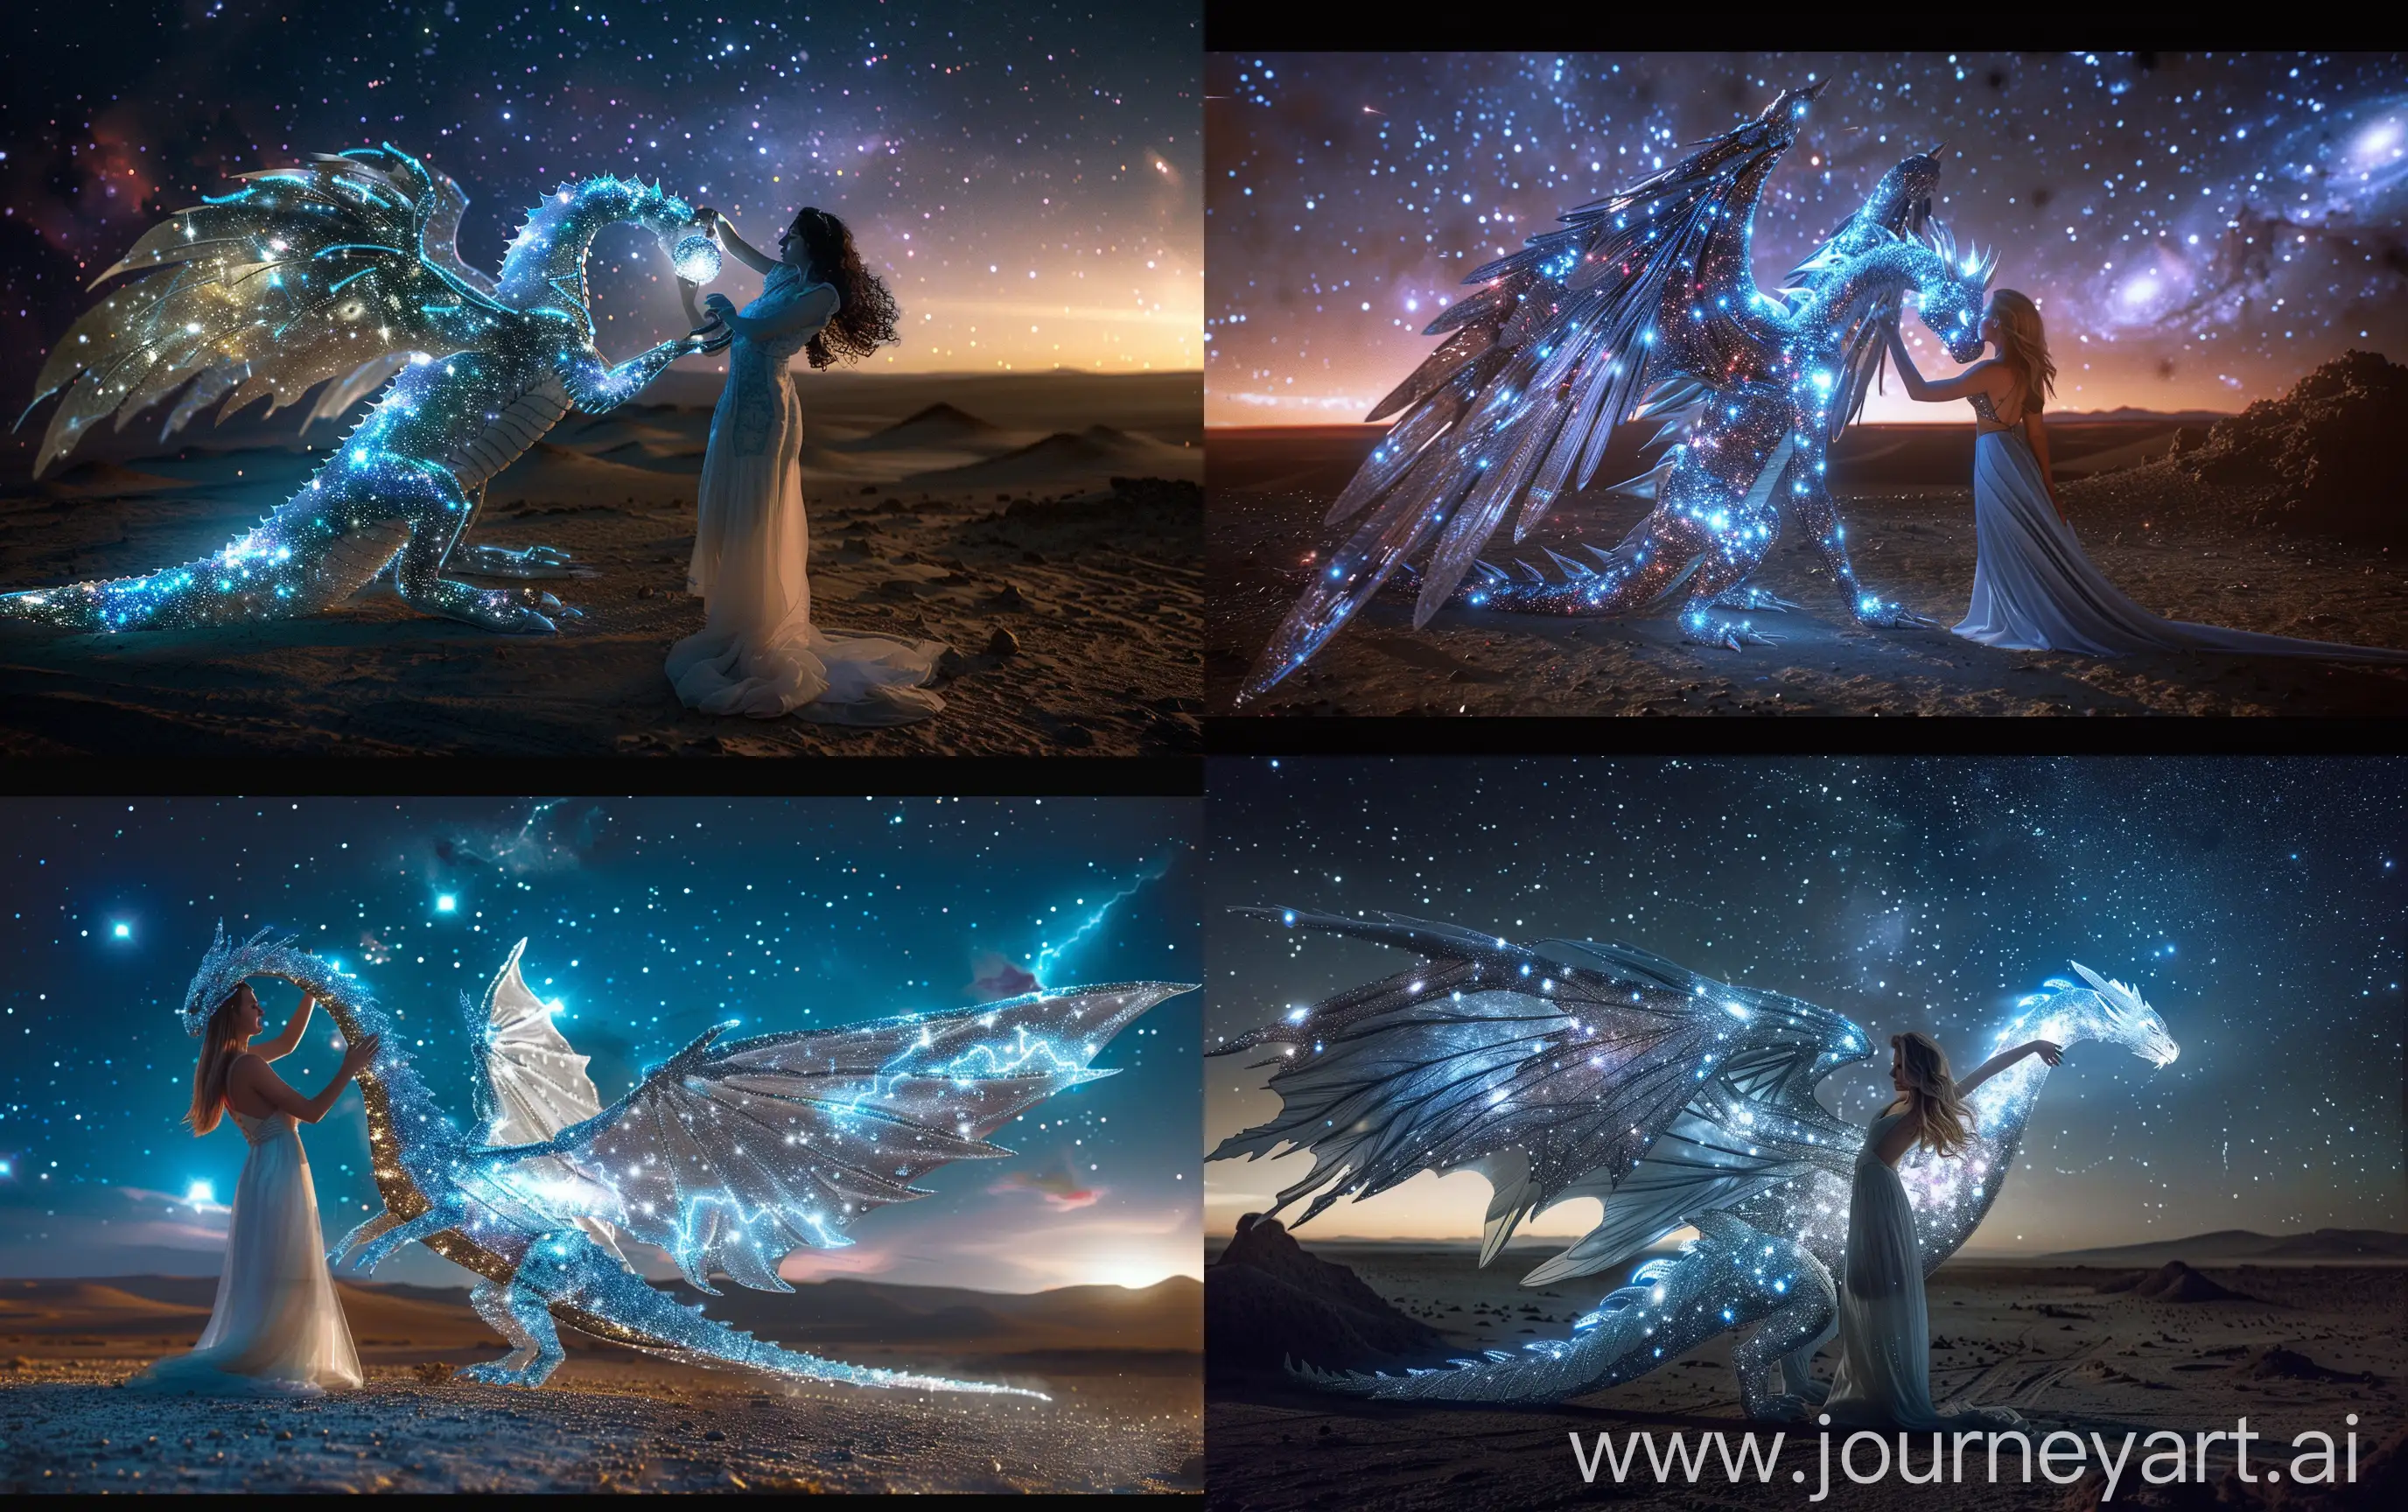 Celestial-Space-Dragon-with-Ethereal-Female-Model-in-Desert-Landscape